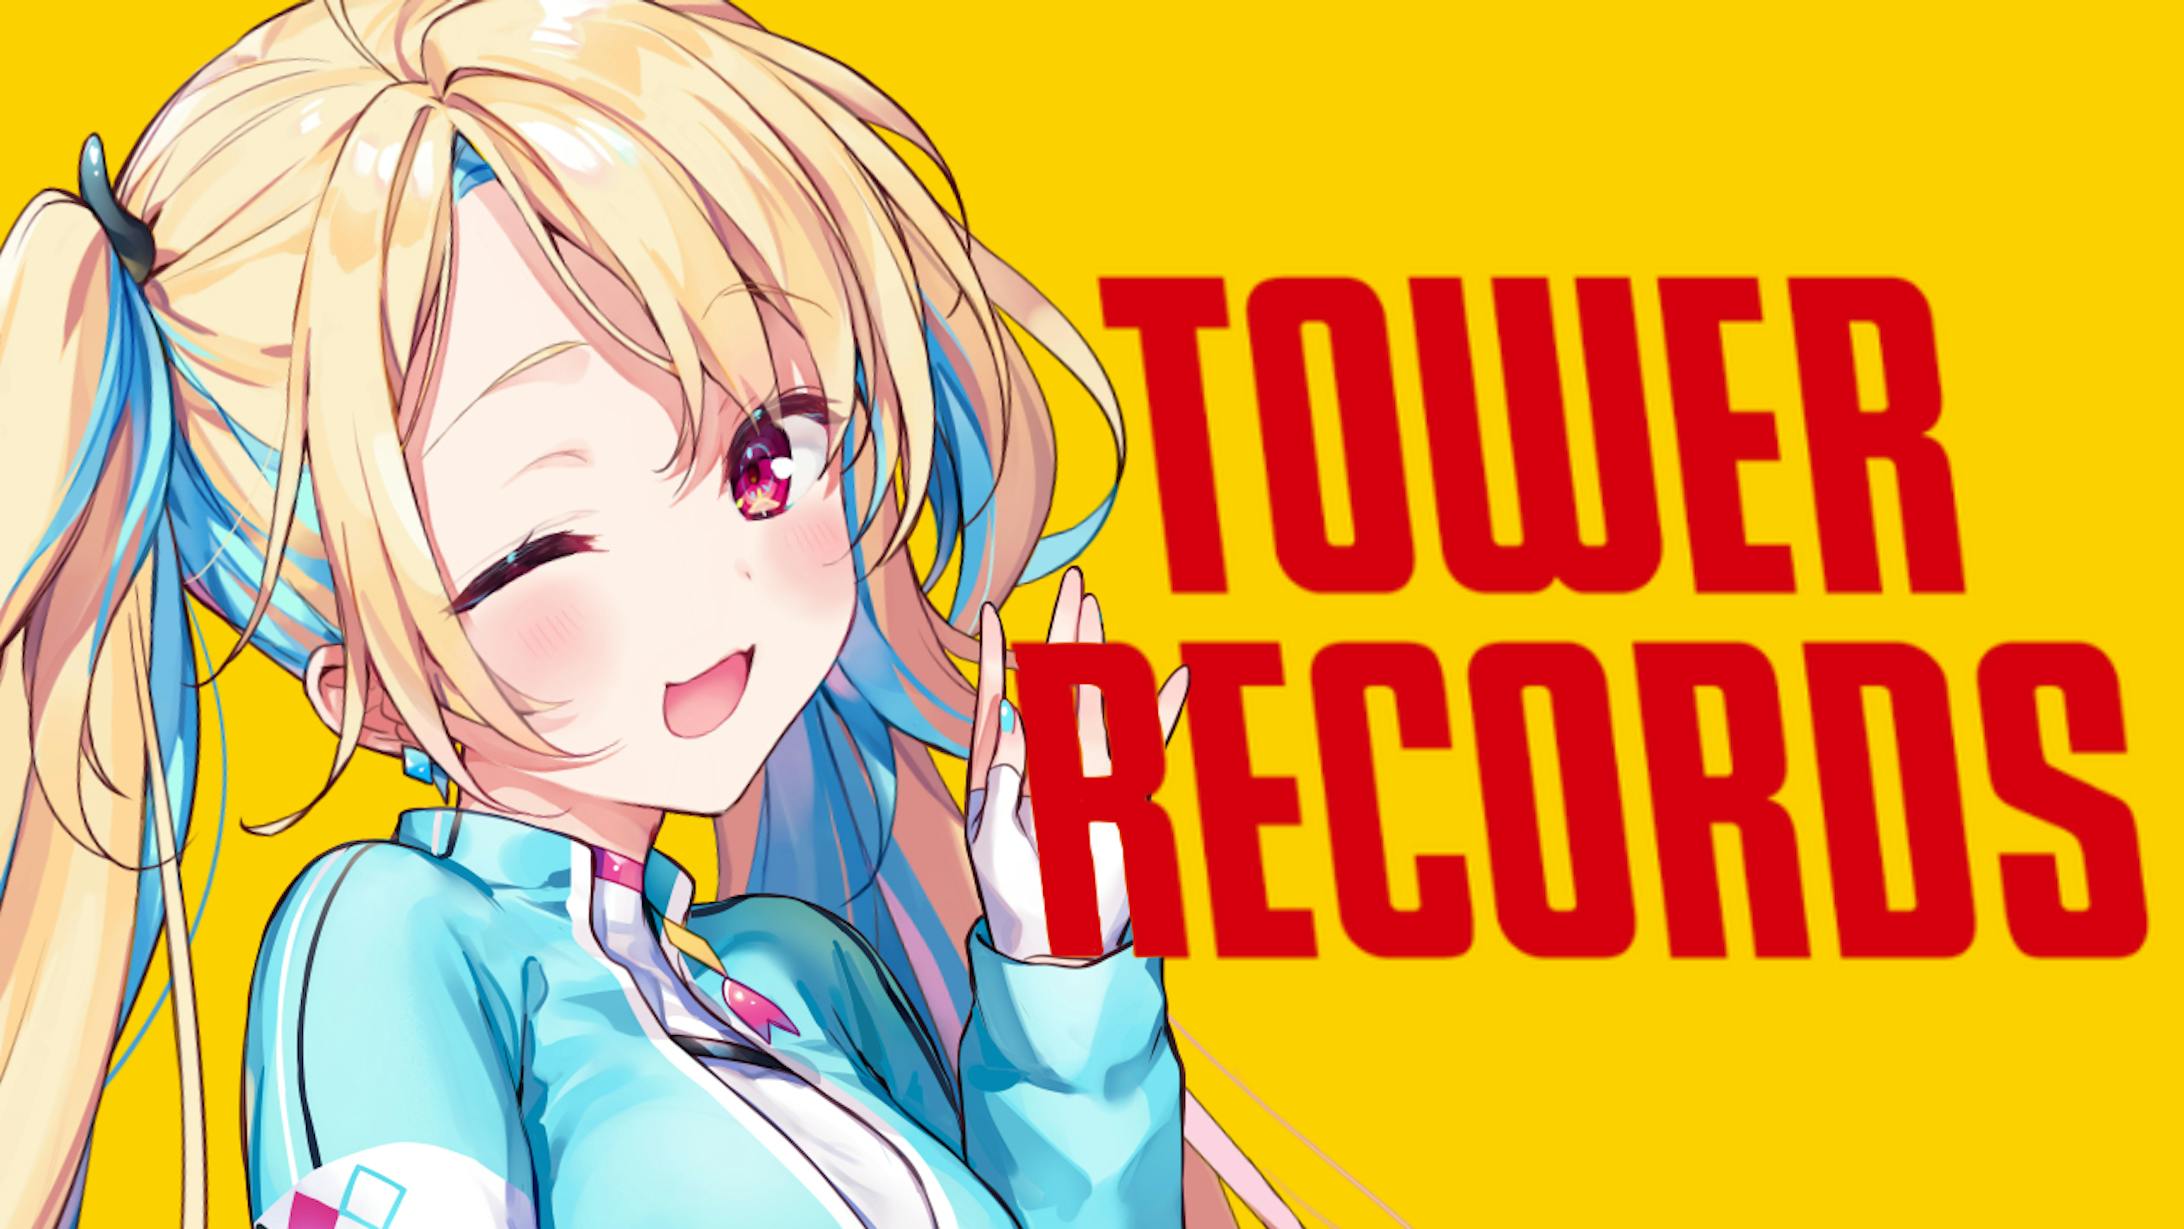 】TOWER RECORDS 渋谷店アンバサダー就任-1